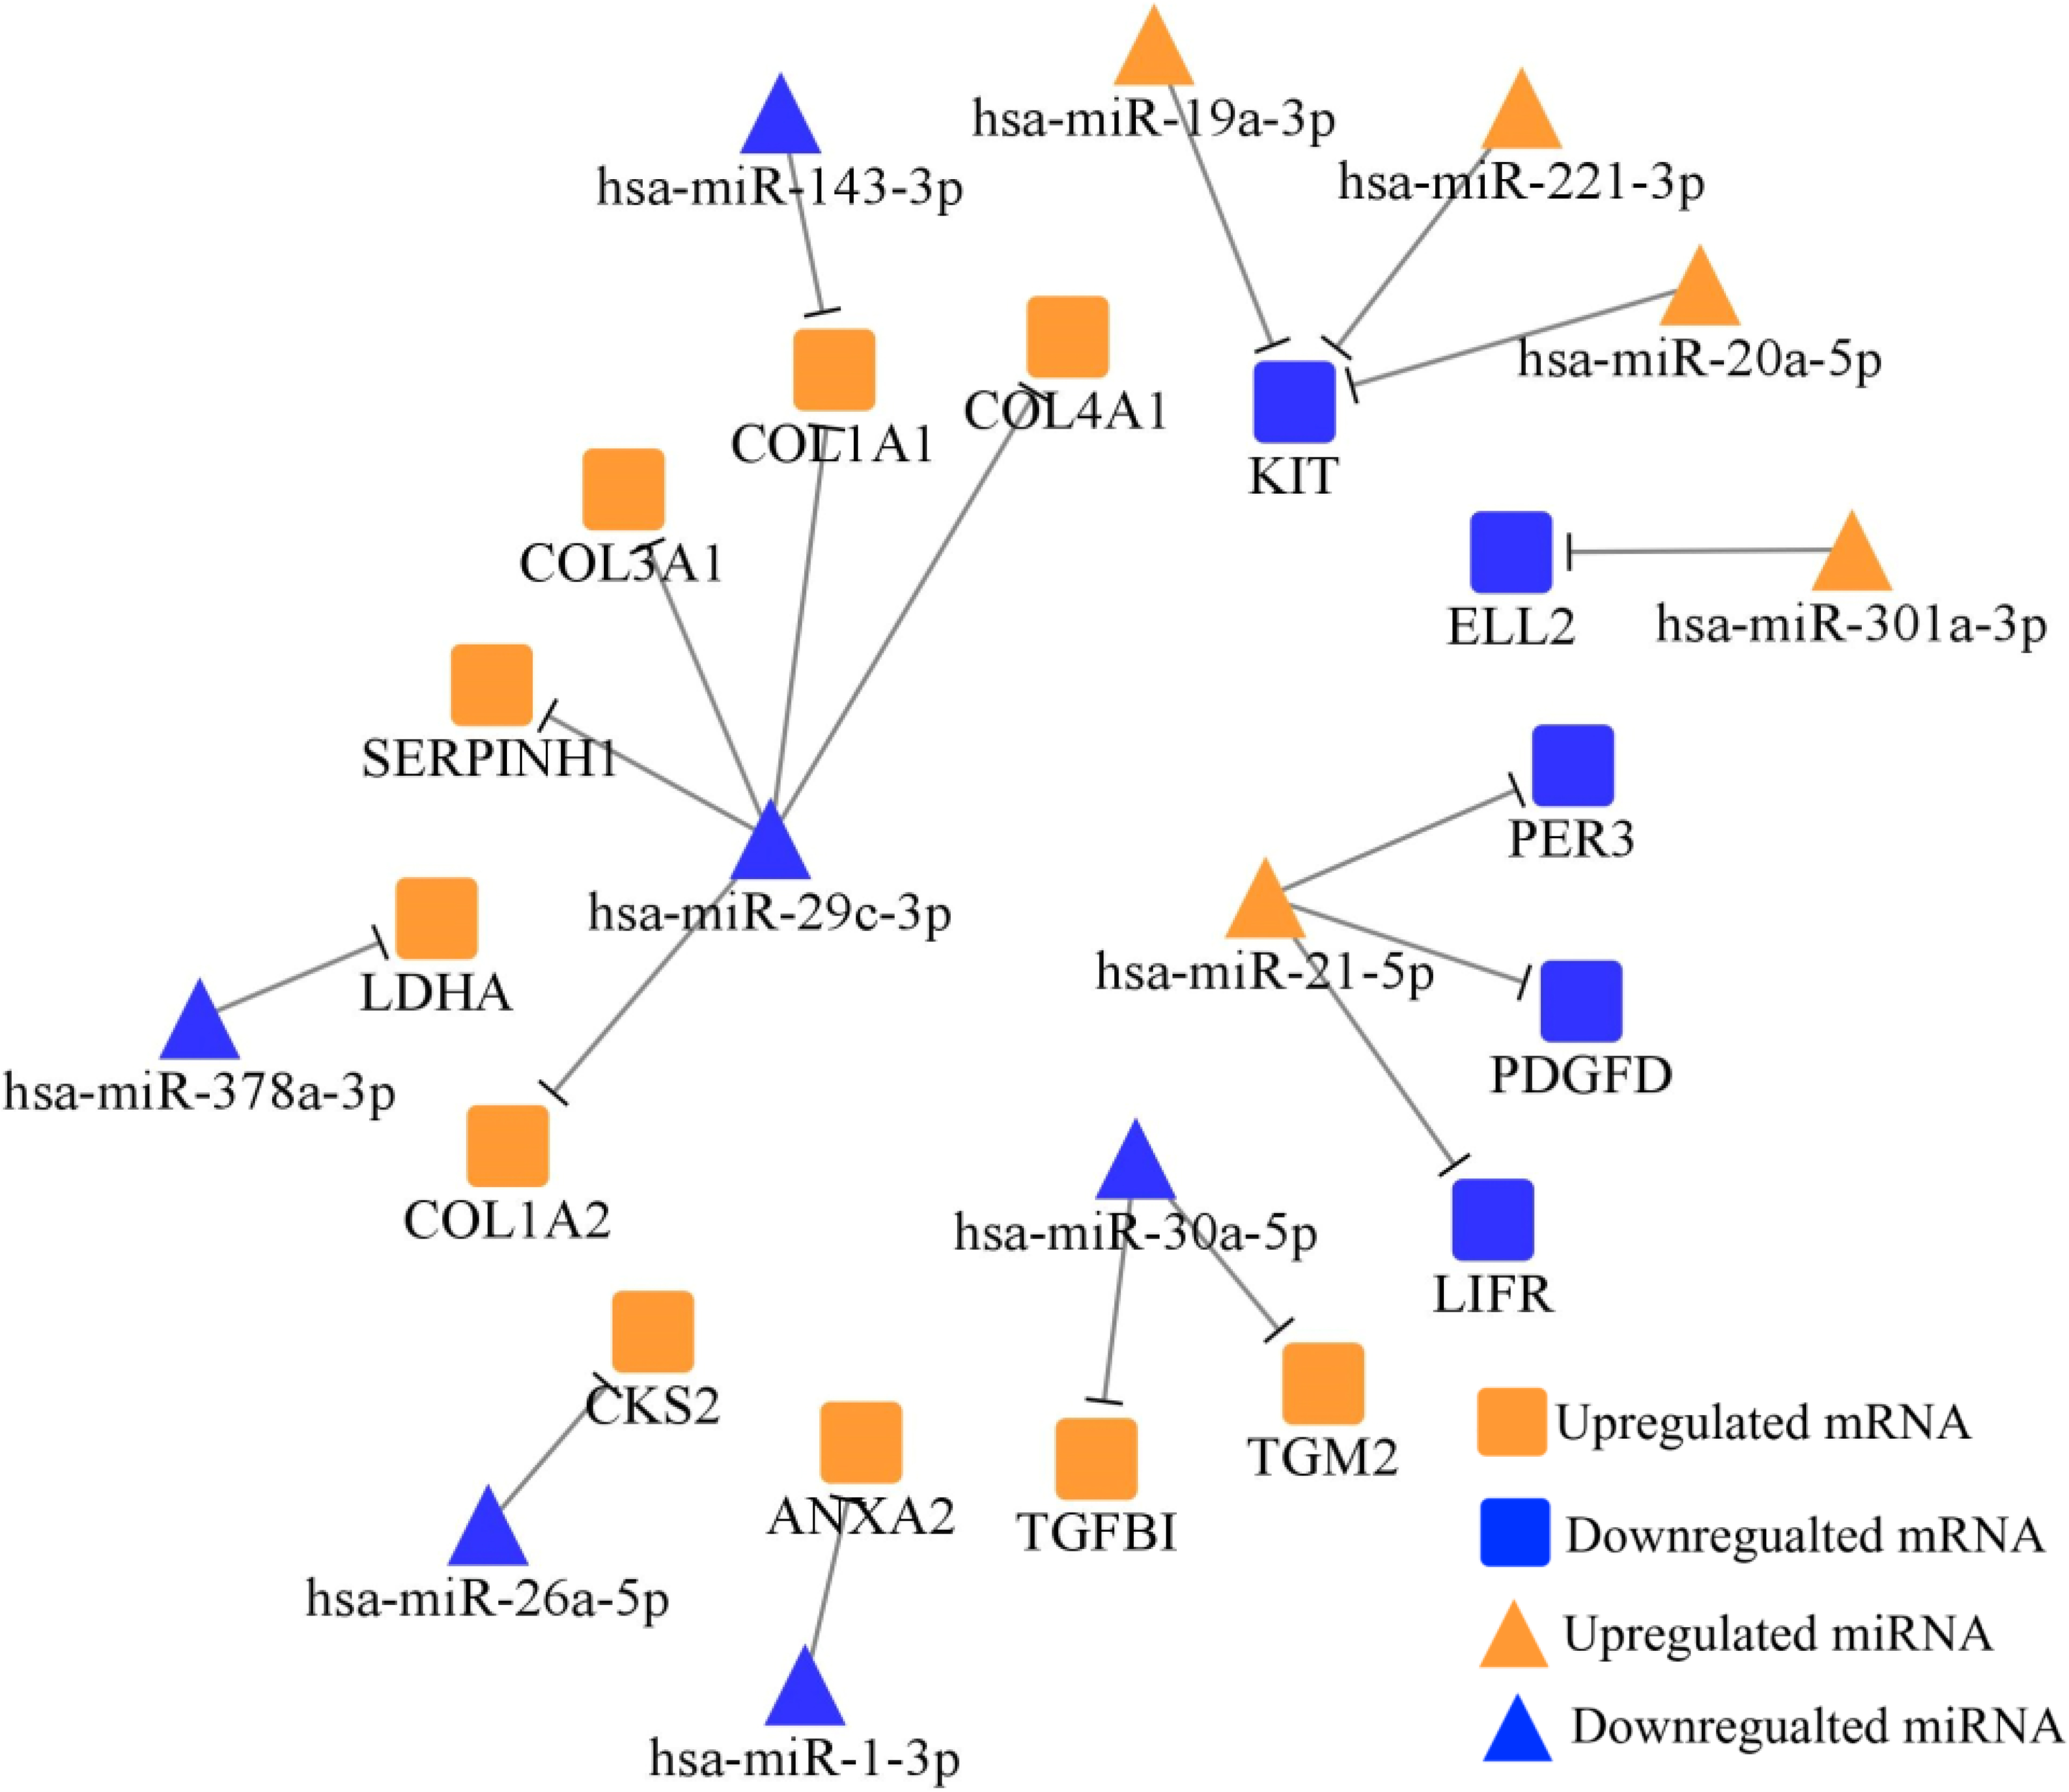 TarBase and MiRTarBase screened totally 18 negatively regulated miRNA-mRNA axes between 38 DE-miRNAs and 228 DE-mRNAs, which were plotted via Cytoscape. Orange nodes represent the upregulated miRNAs/mRNAs in STADs versus NCs, while blue nodes represent the downregulated miRNAs/mRNAs in STADs versus NCs.